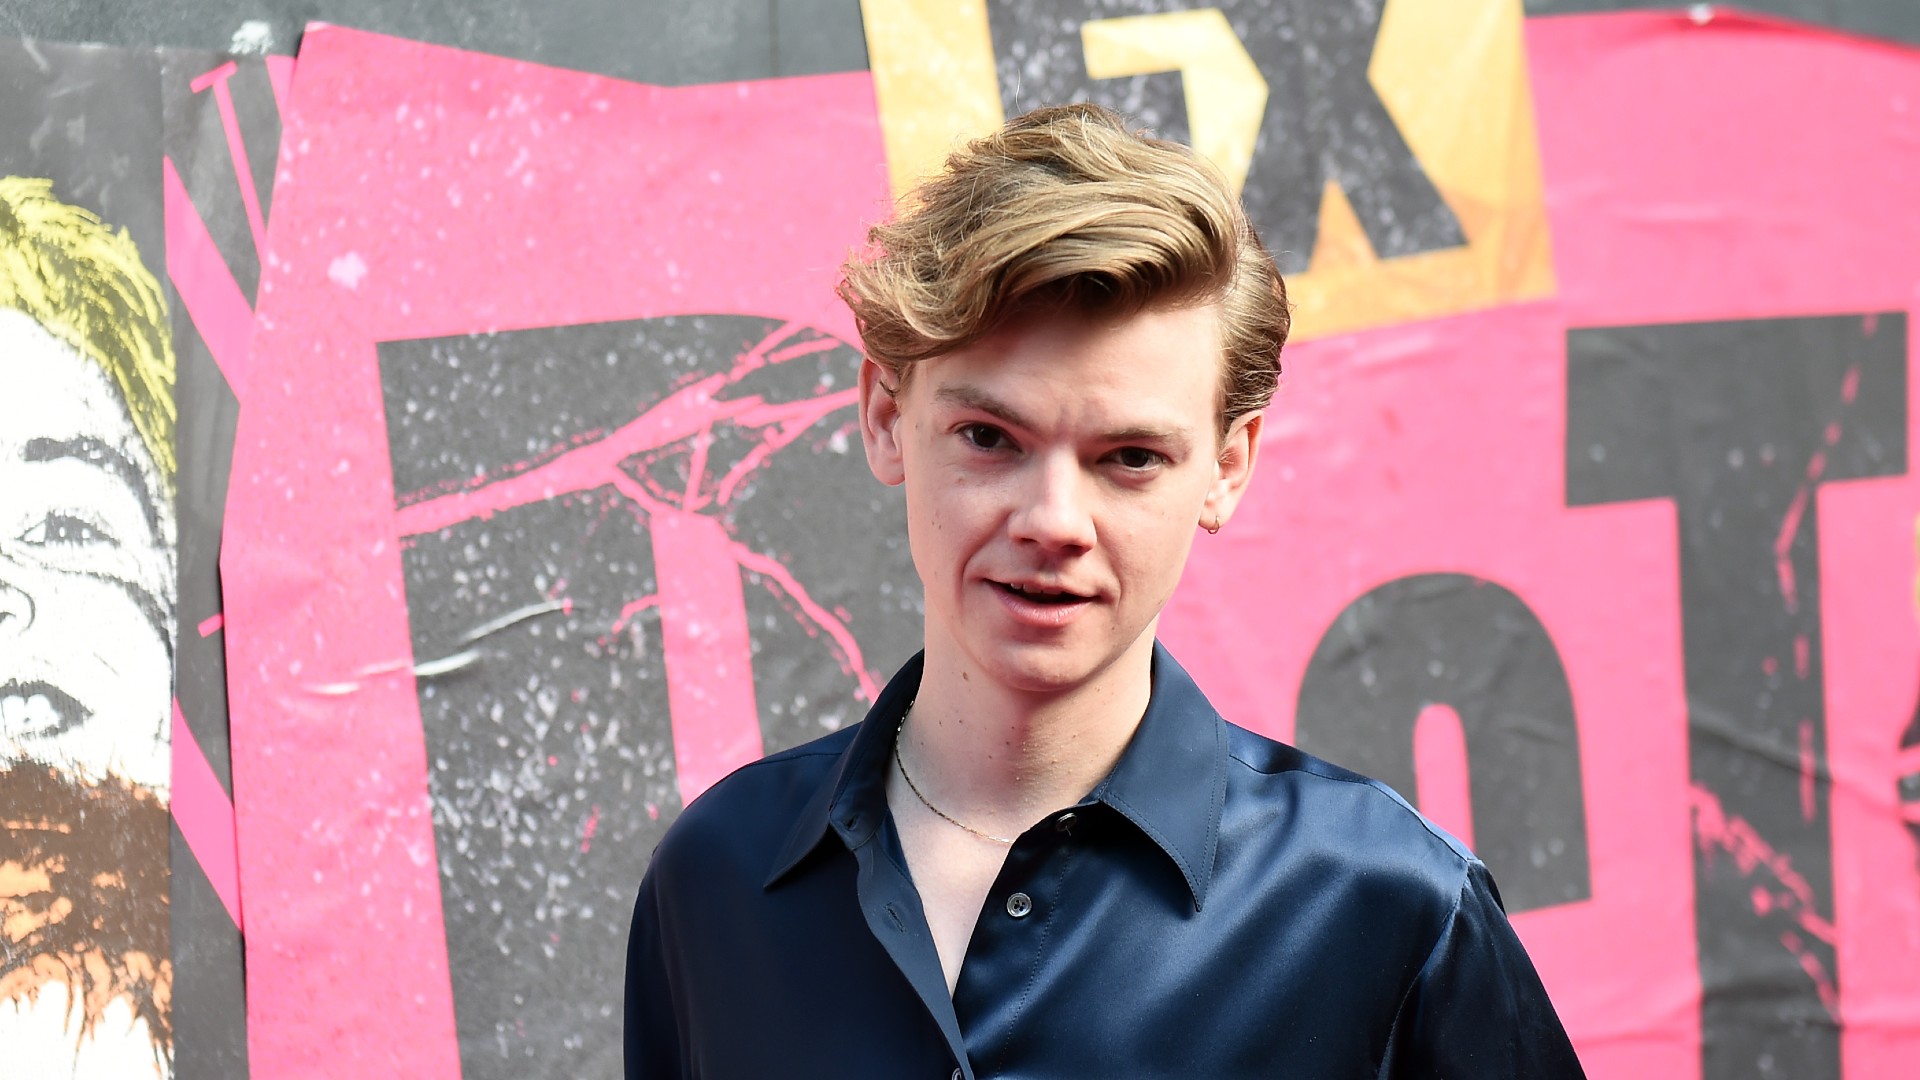 Casting News: Thomas Brodie-Sangster to Star in 'The Artful Dodger' Series